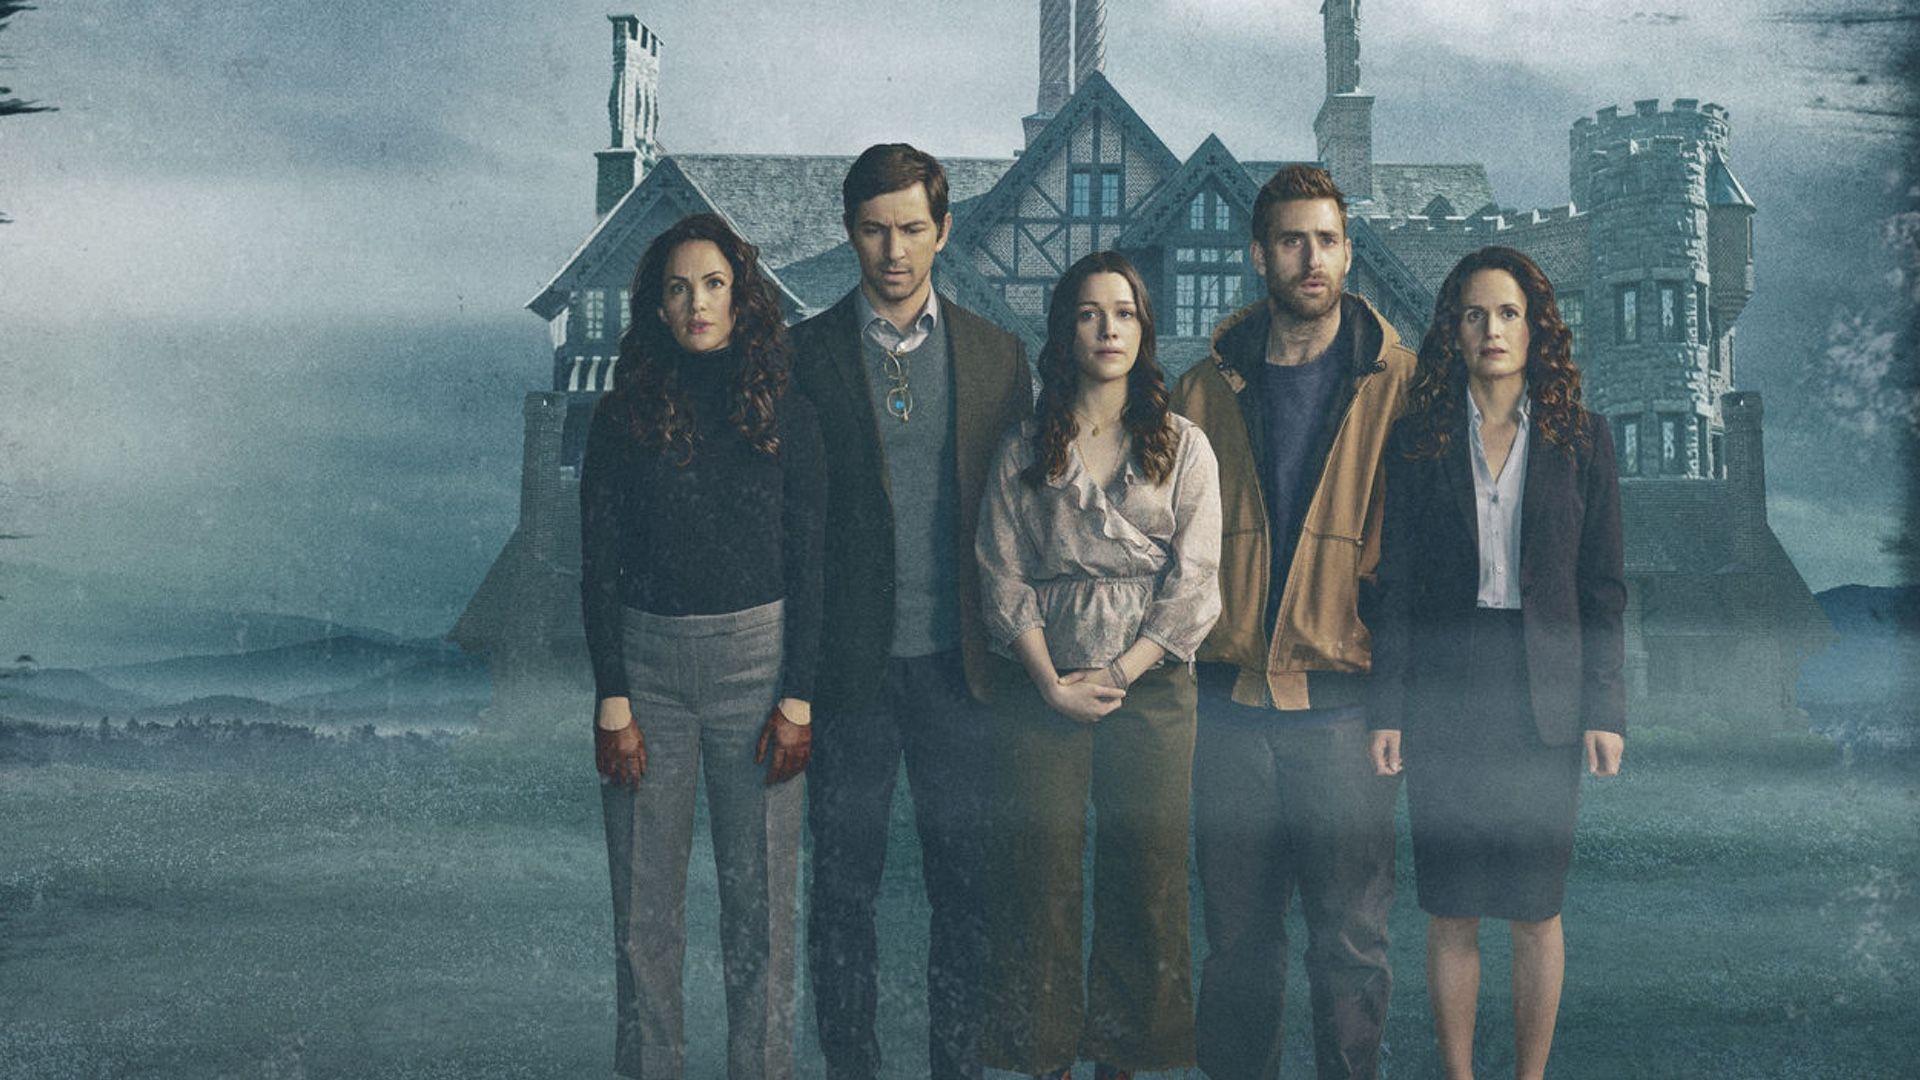 THE HAUNTING OF HILL HOUSE Featurette Focuses on The Creation of